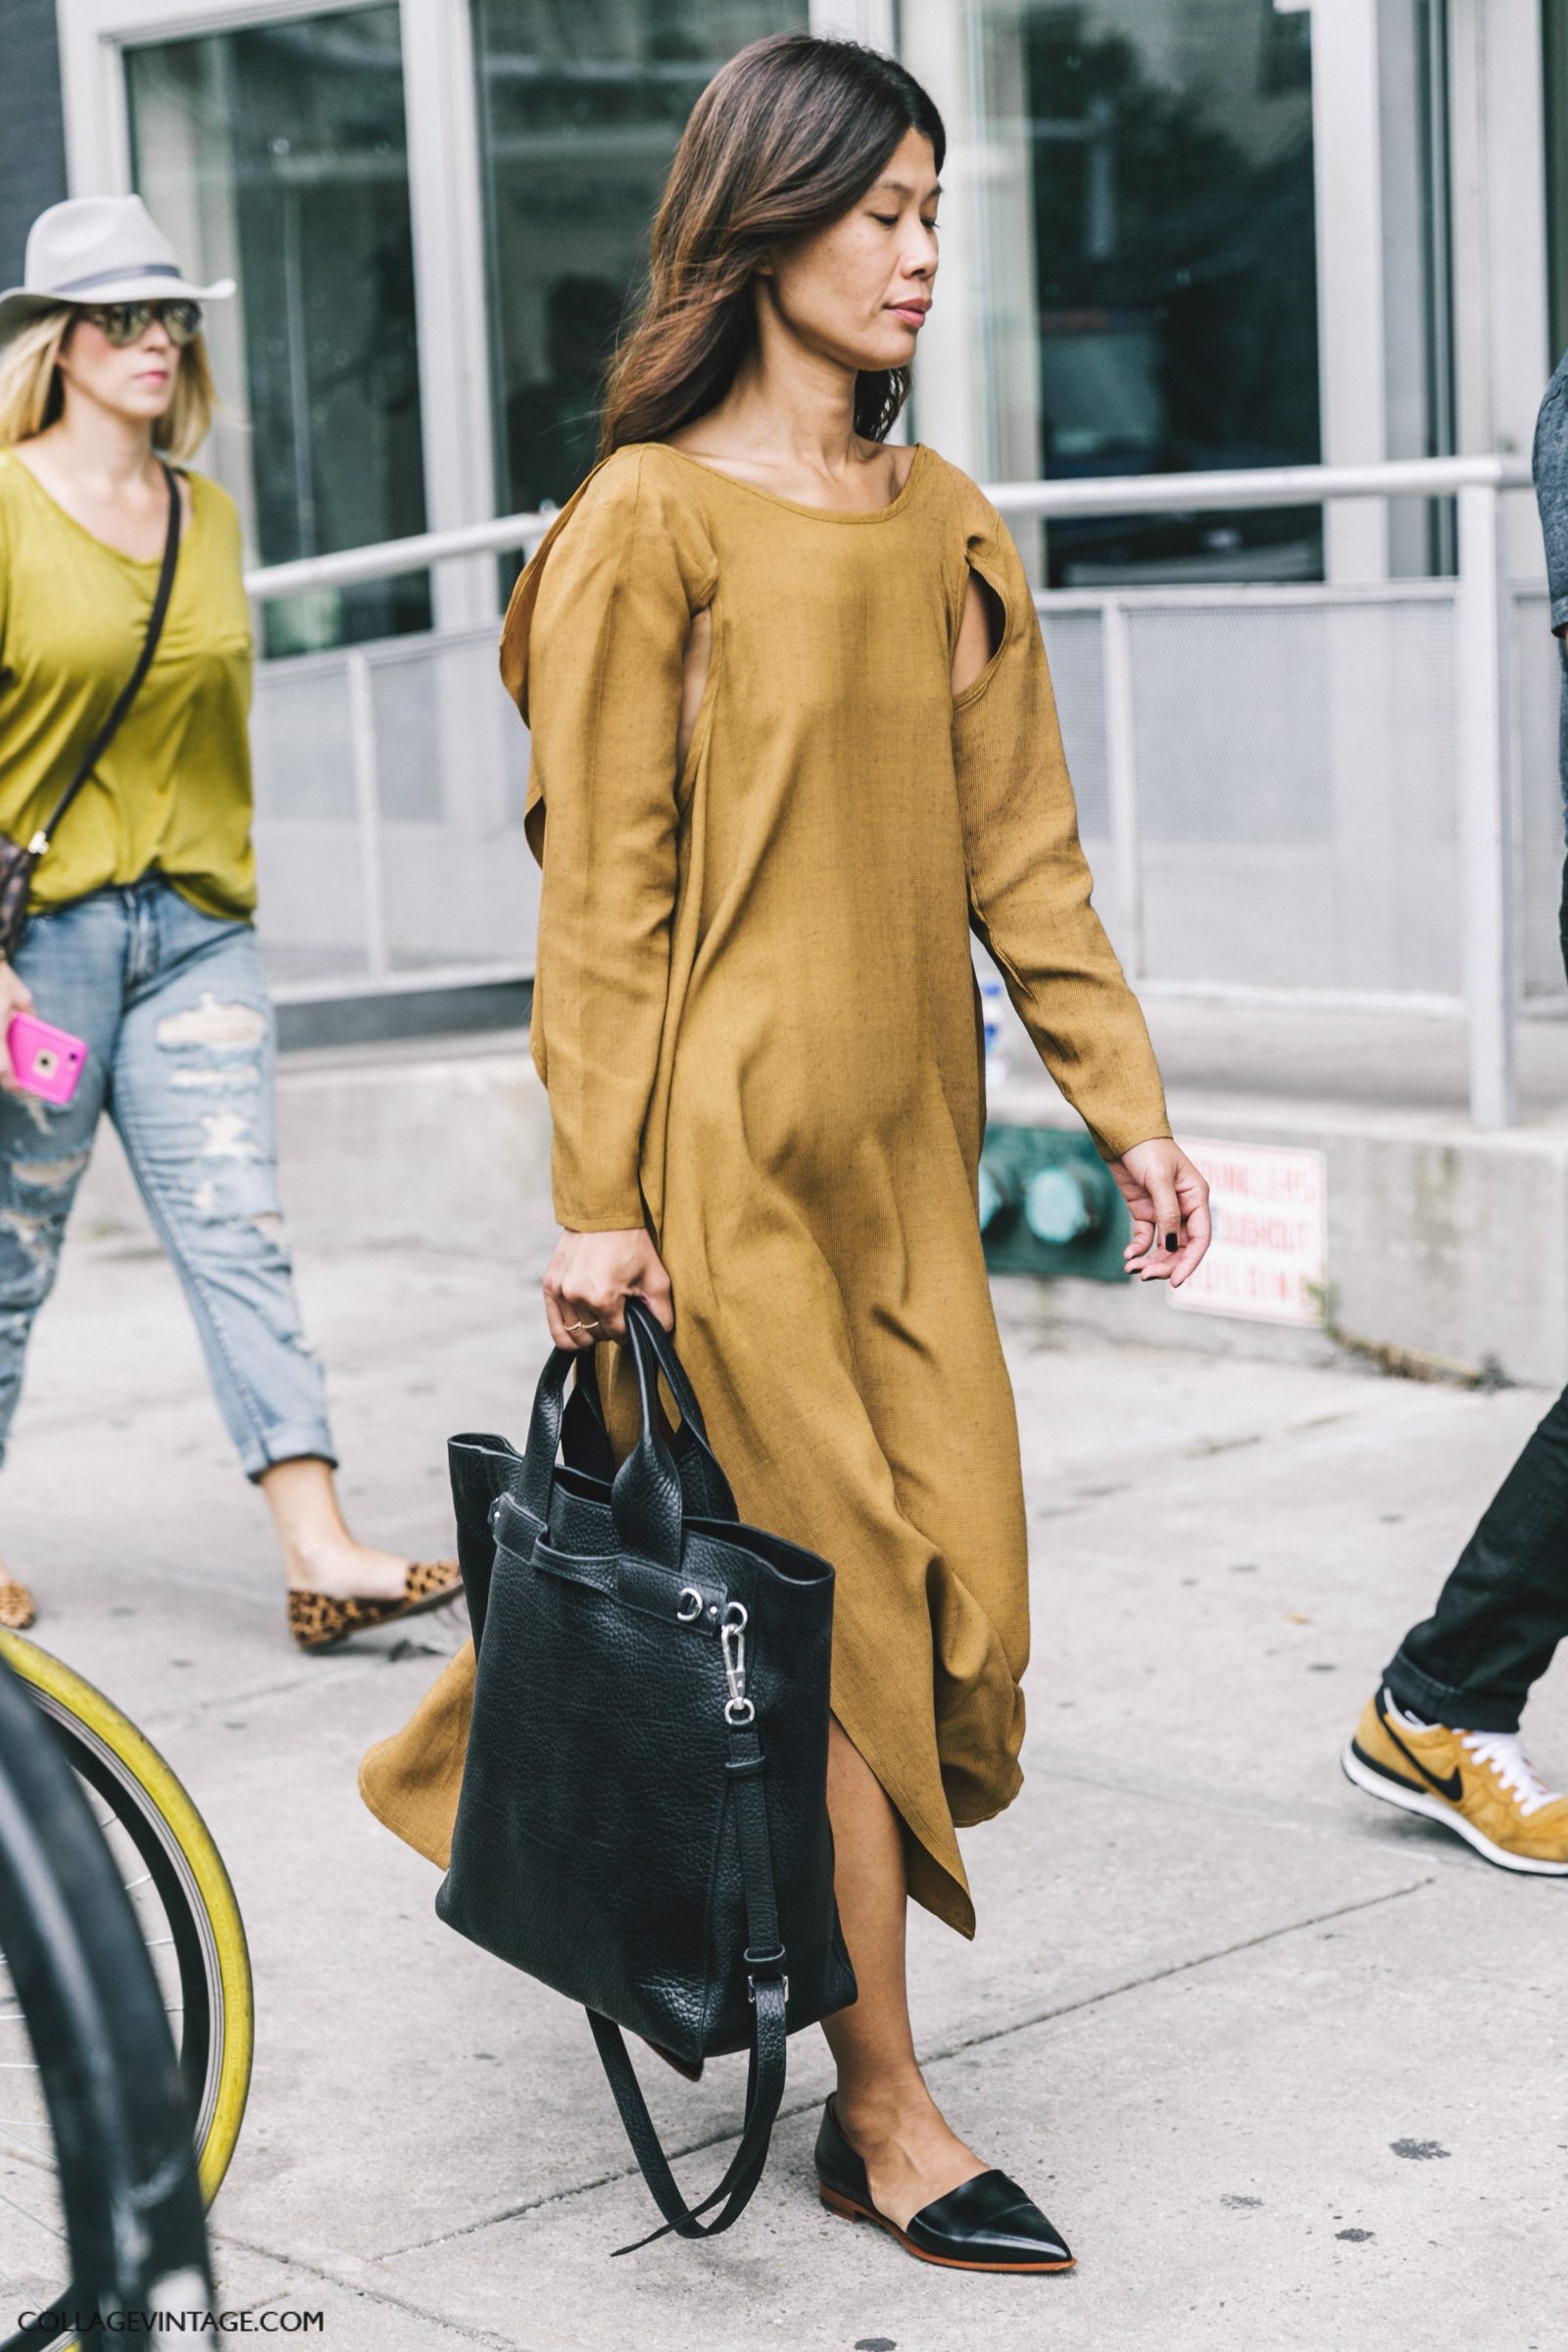 nyfw-new_york_fashion_week_ss17-street_style-outfits-collage_vintage-mustard_dress-shopper_bag-1